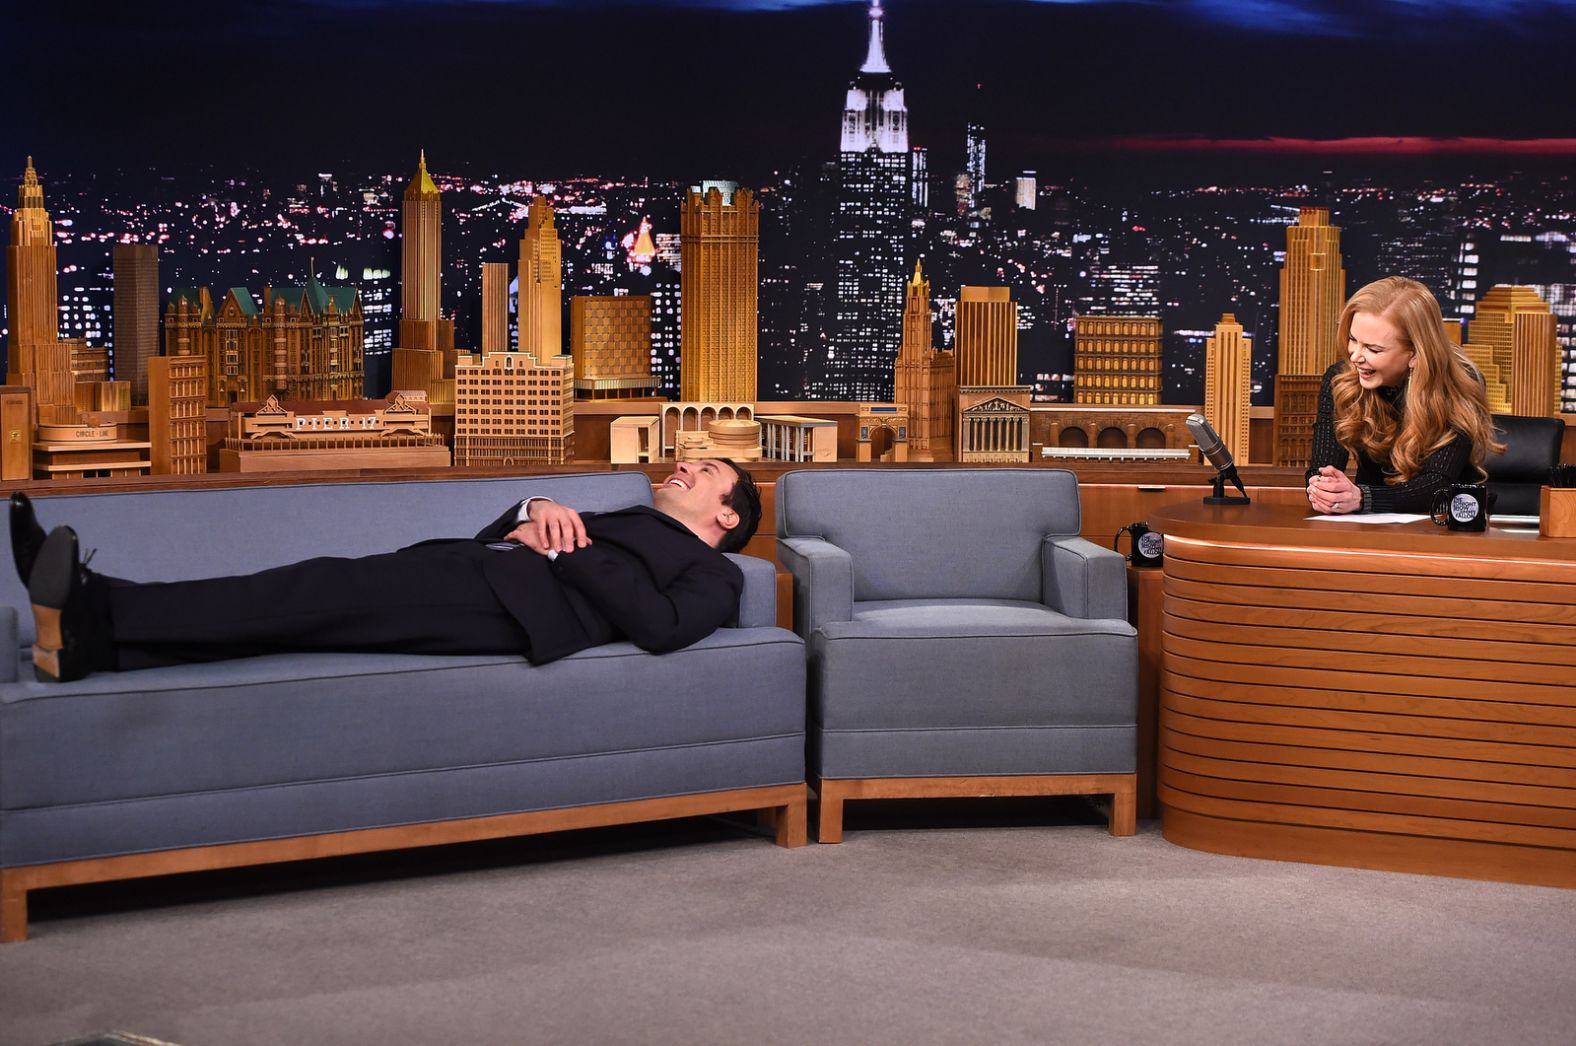 Kidman visits "The Tonight Show" with Jimmy Fallon in 2015.